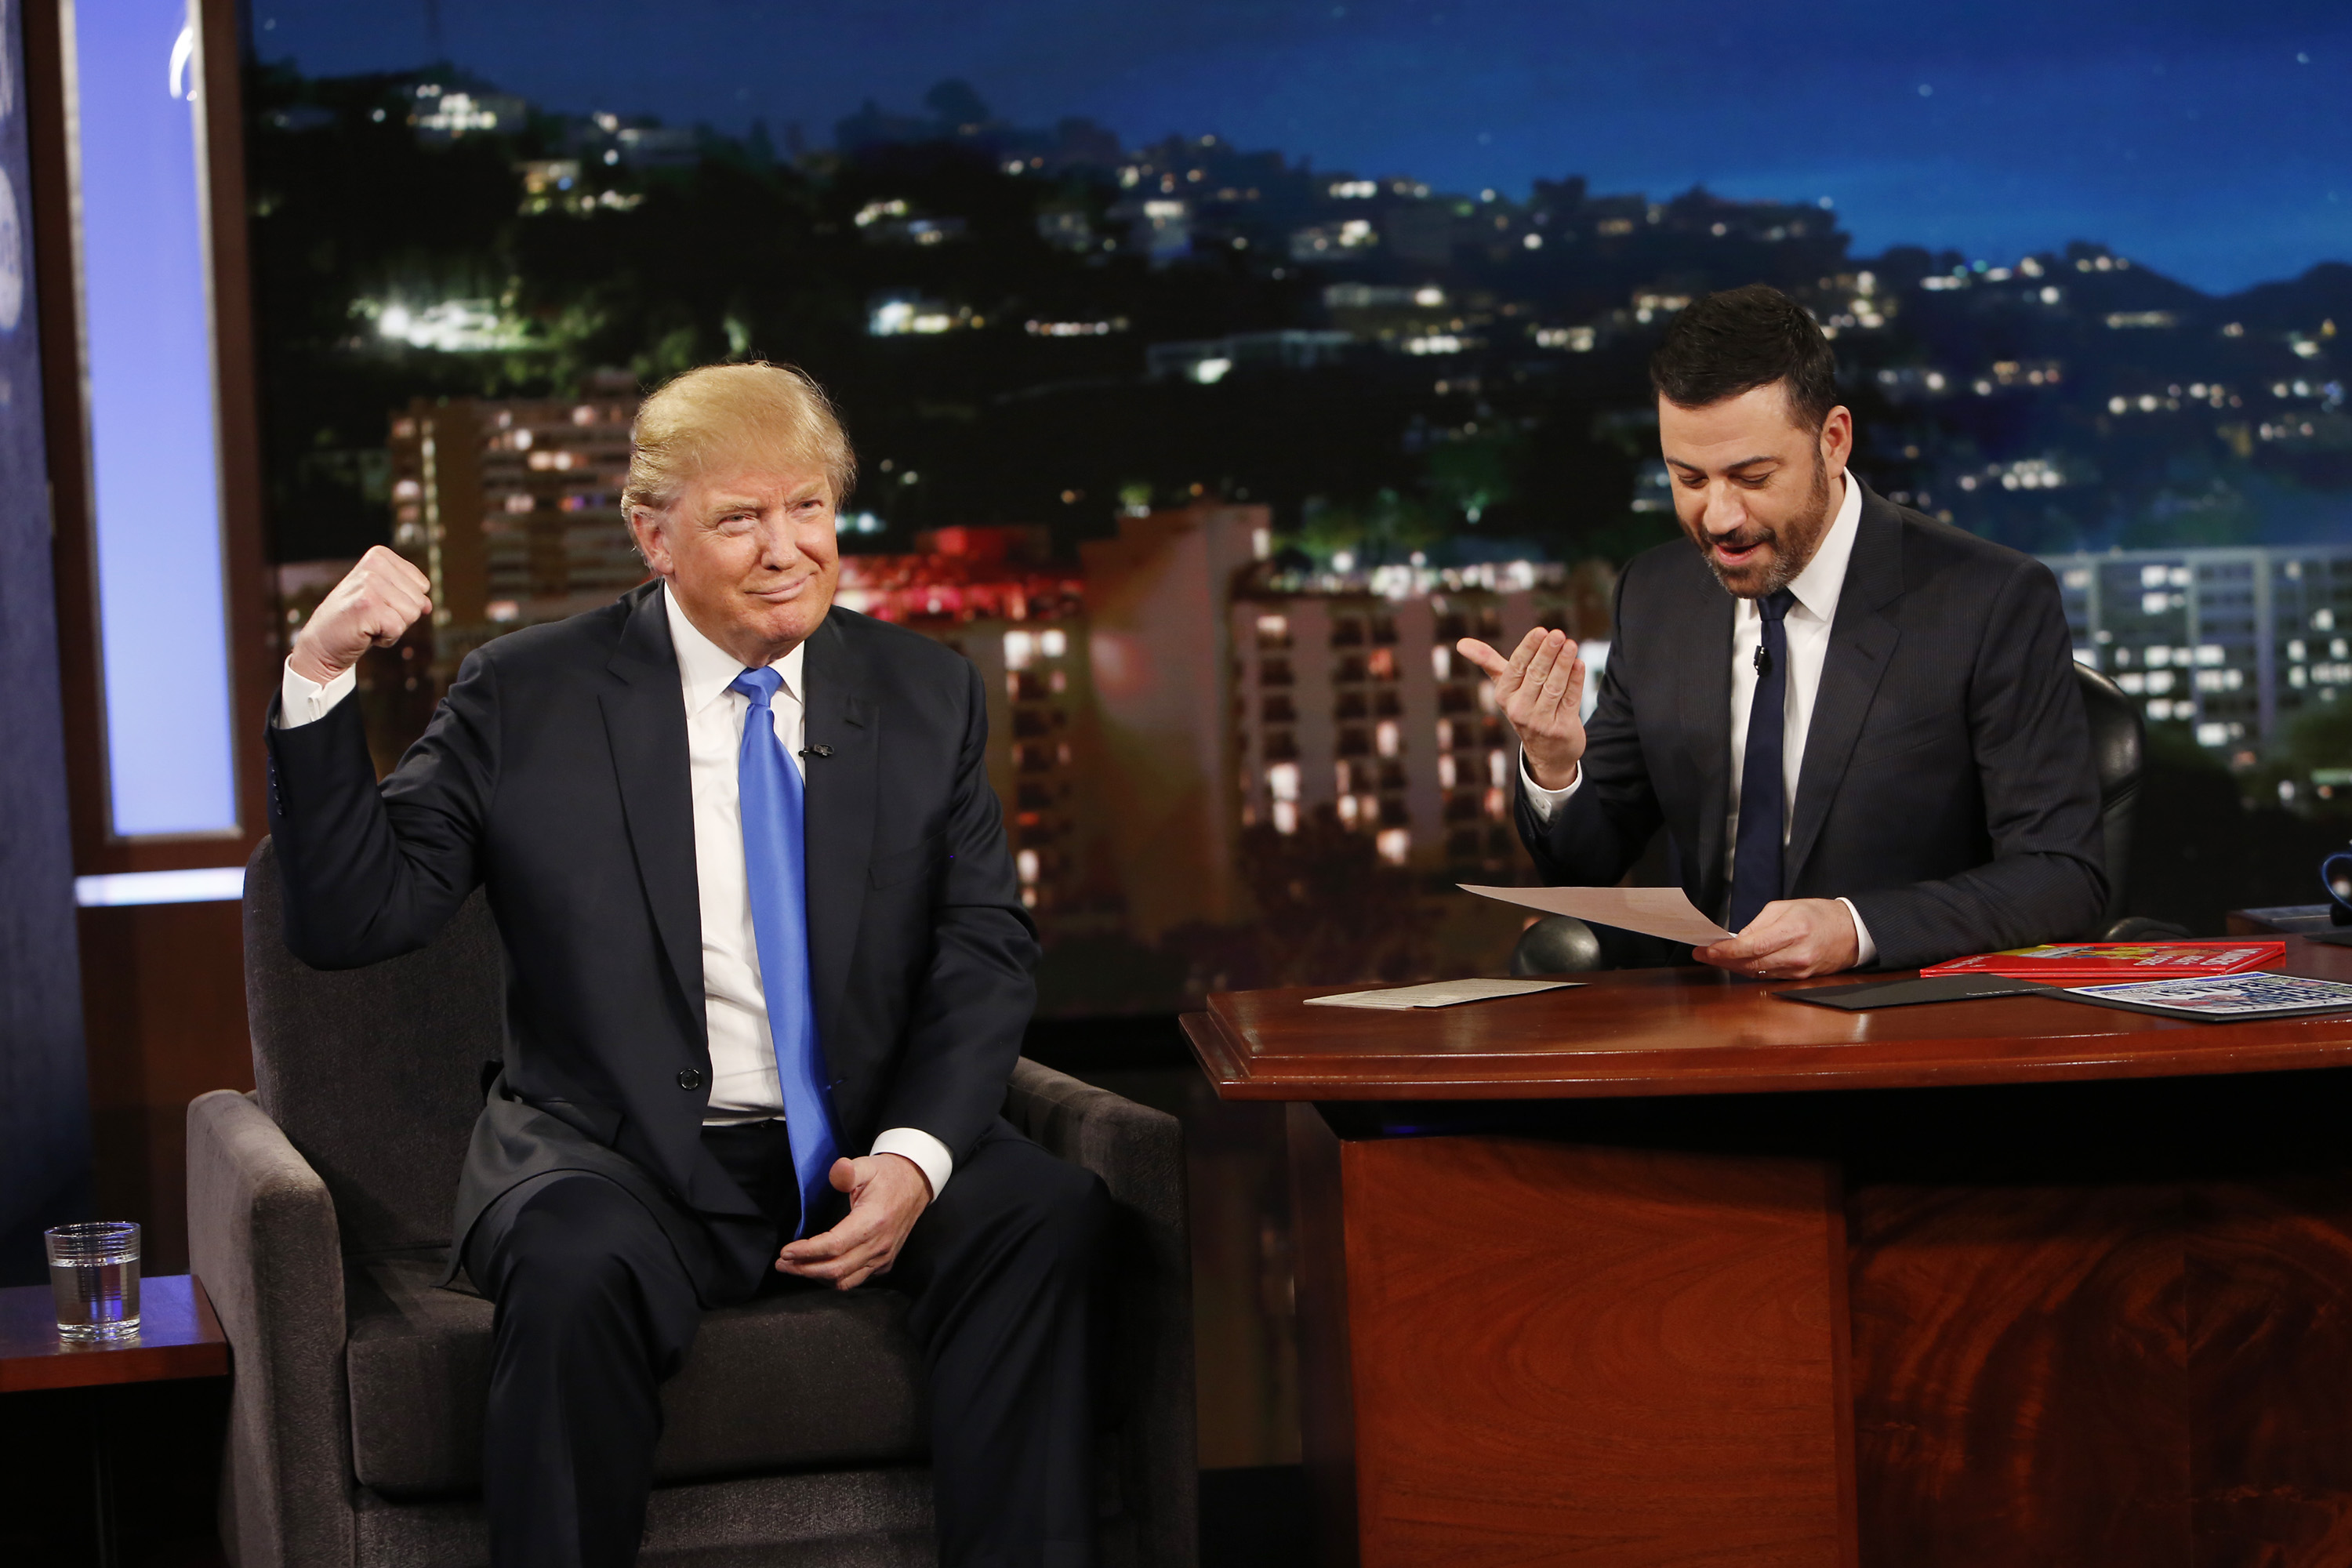 GOP presidential candidate Donald Trump appears on Jimmy Kimmel Live! on  Dec. 16. 2015 (Randy Holmes—ABC via Getty Images)